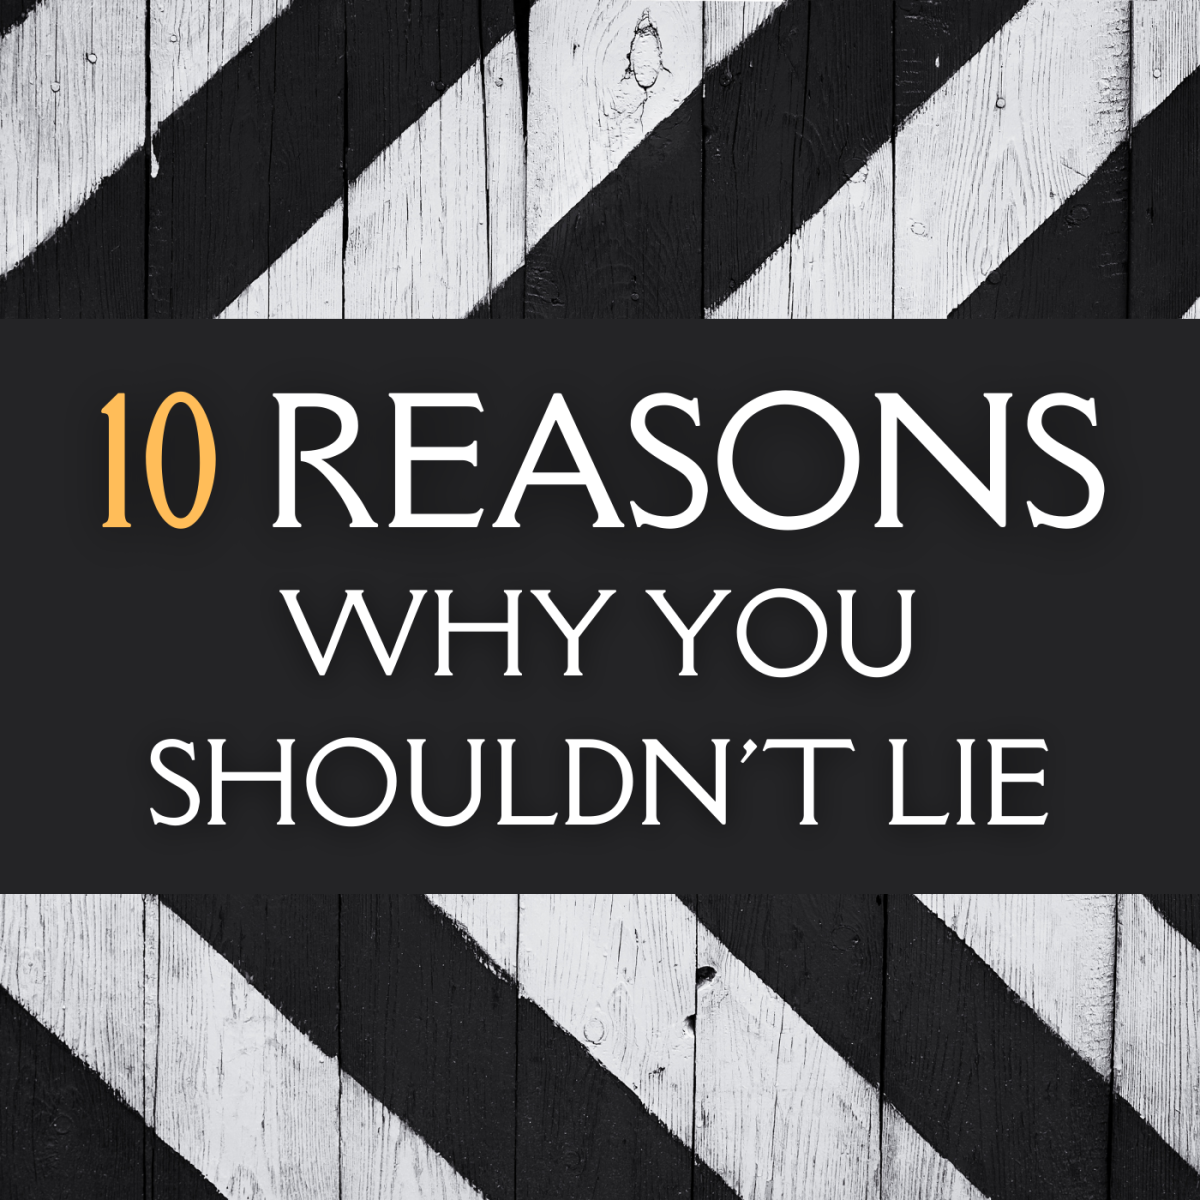 Why should you avoid telling lies? Check out the top 10 reasons to stick to the truth.